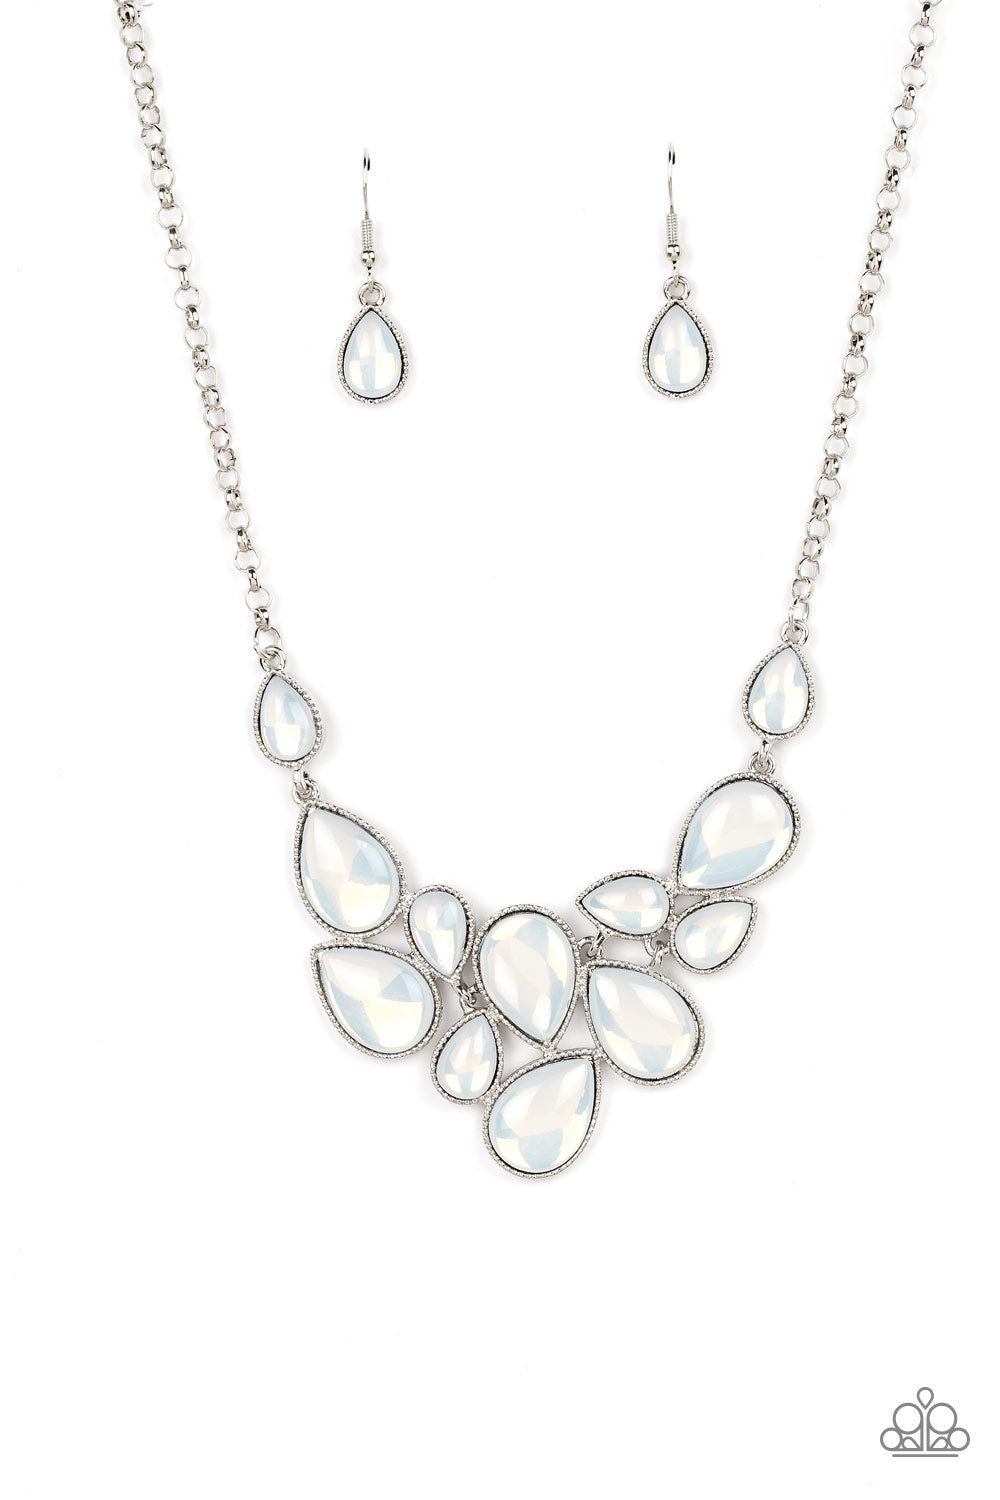 Keeps GLOWING and GLOWING - White Necklace